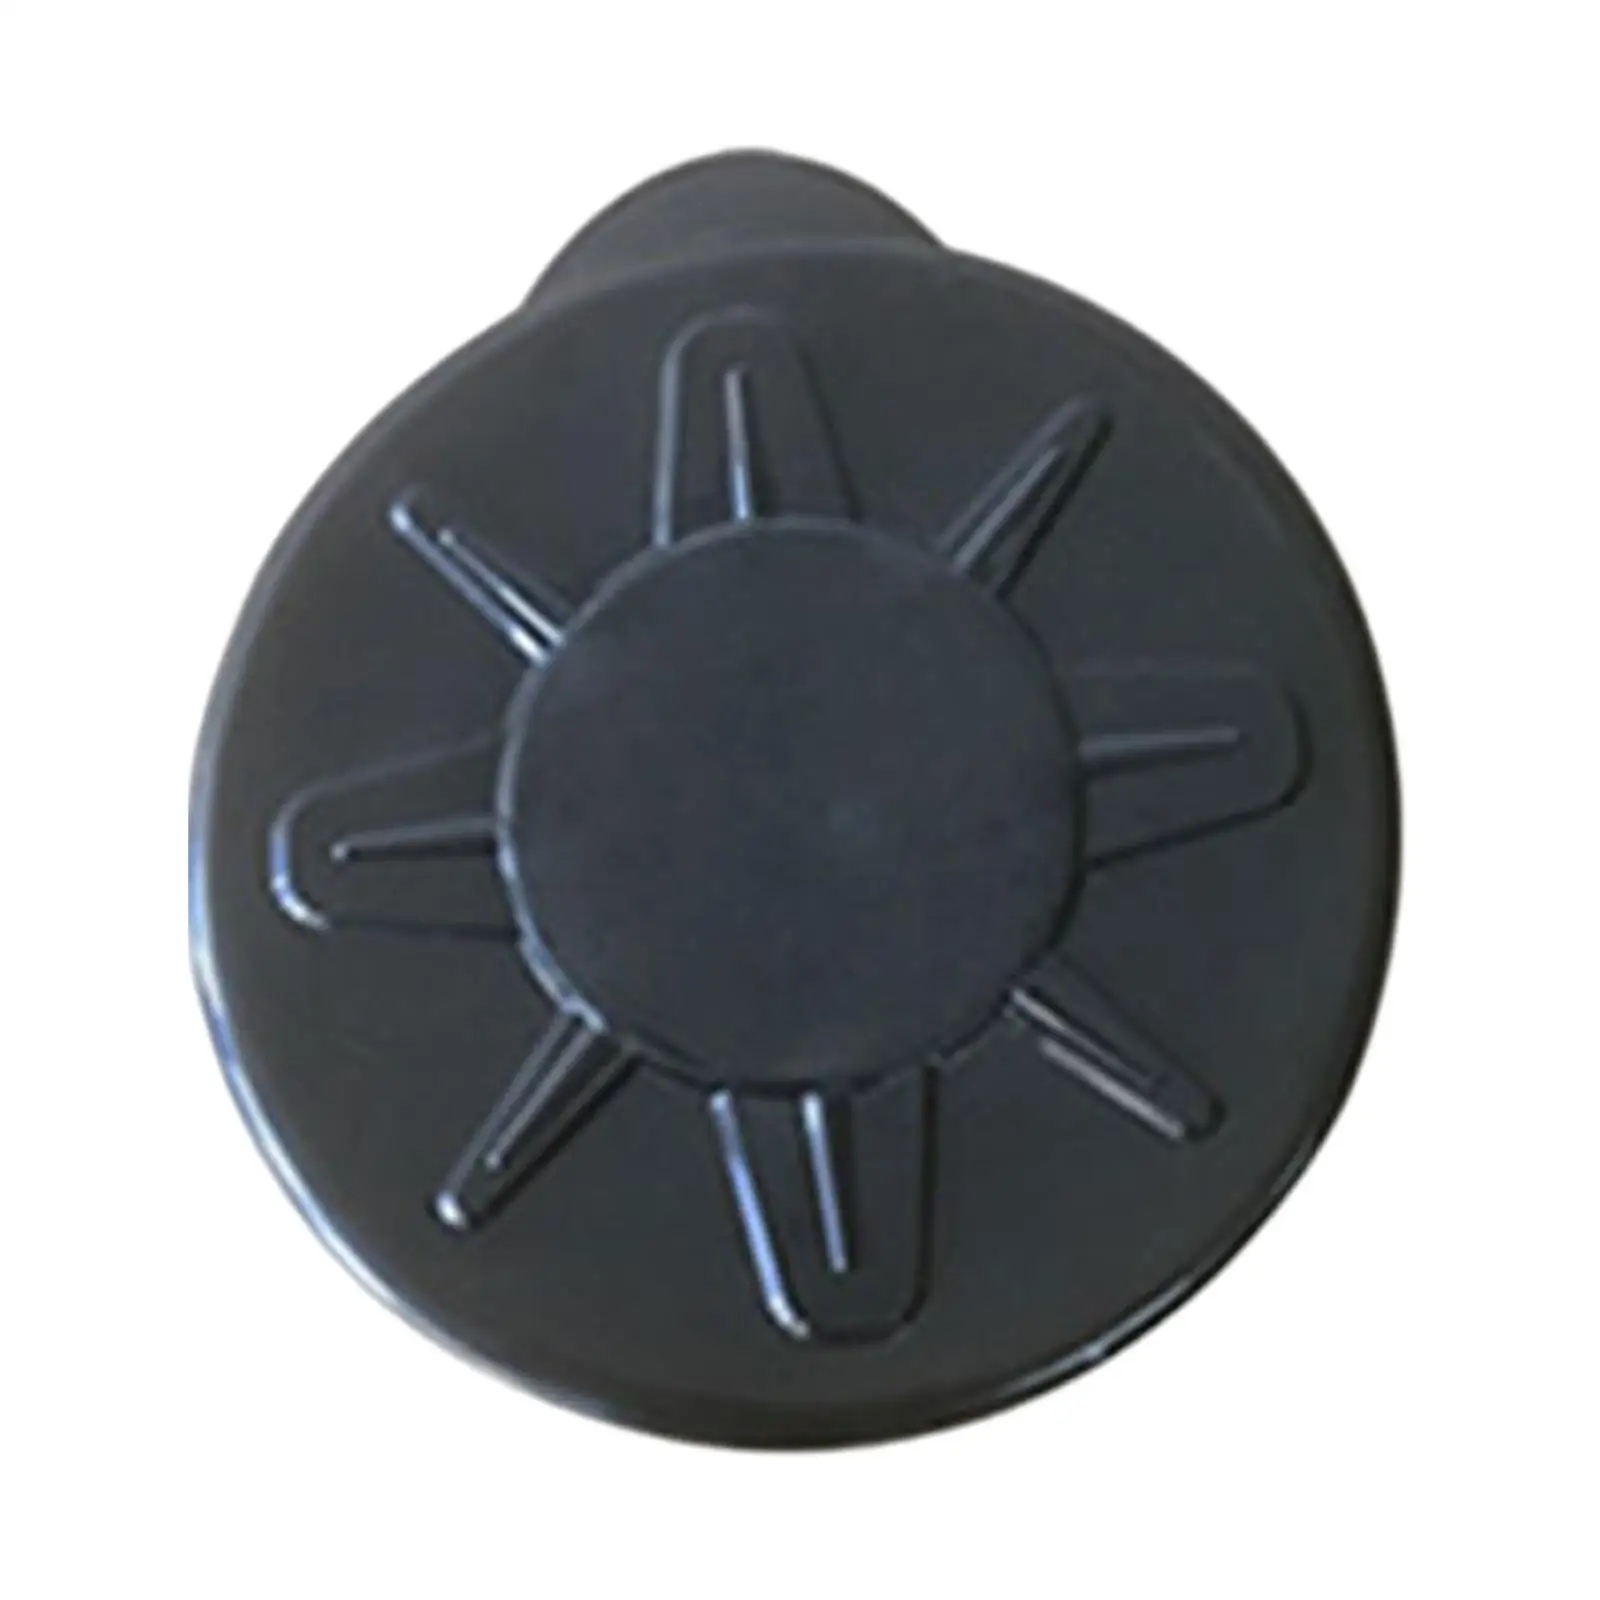 Kayak Accessories Access Cover Parts for Kayak Marine